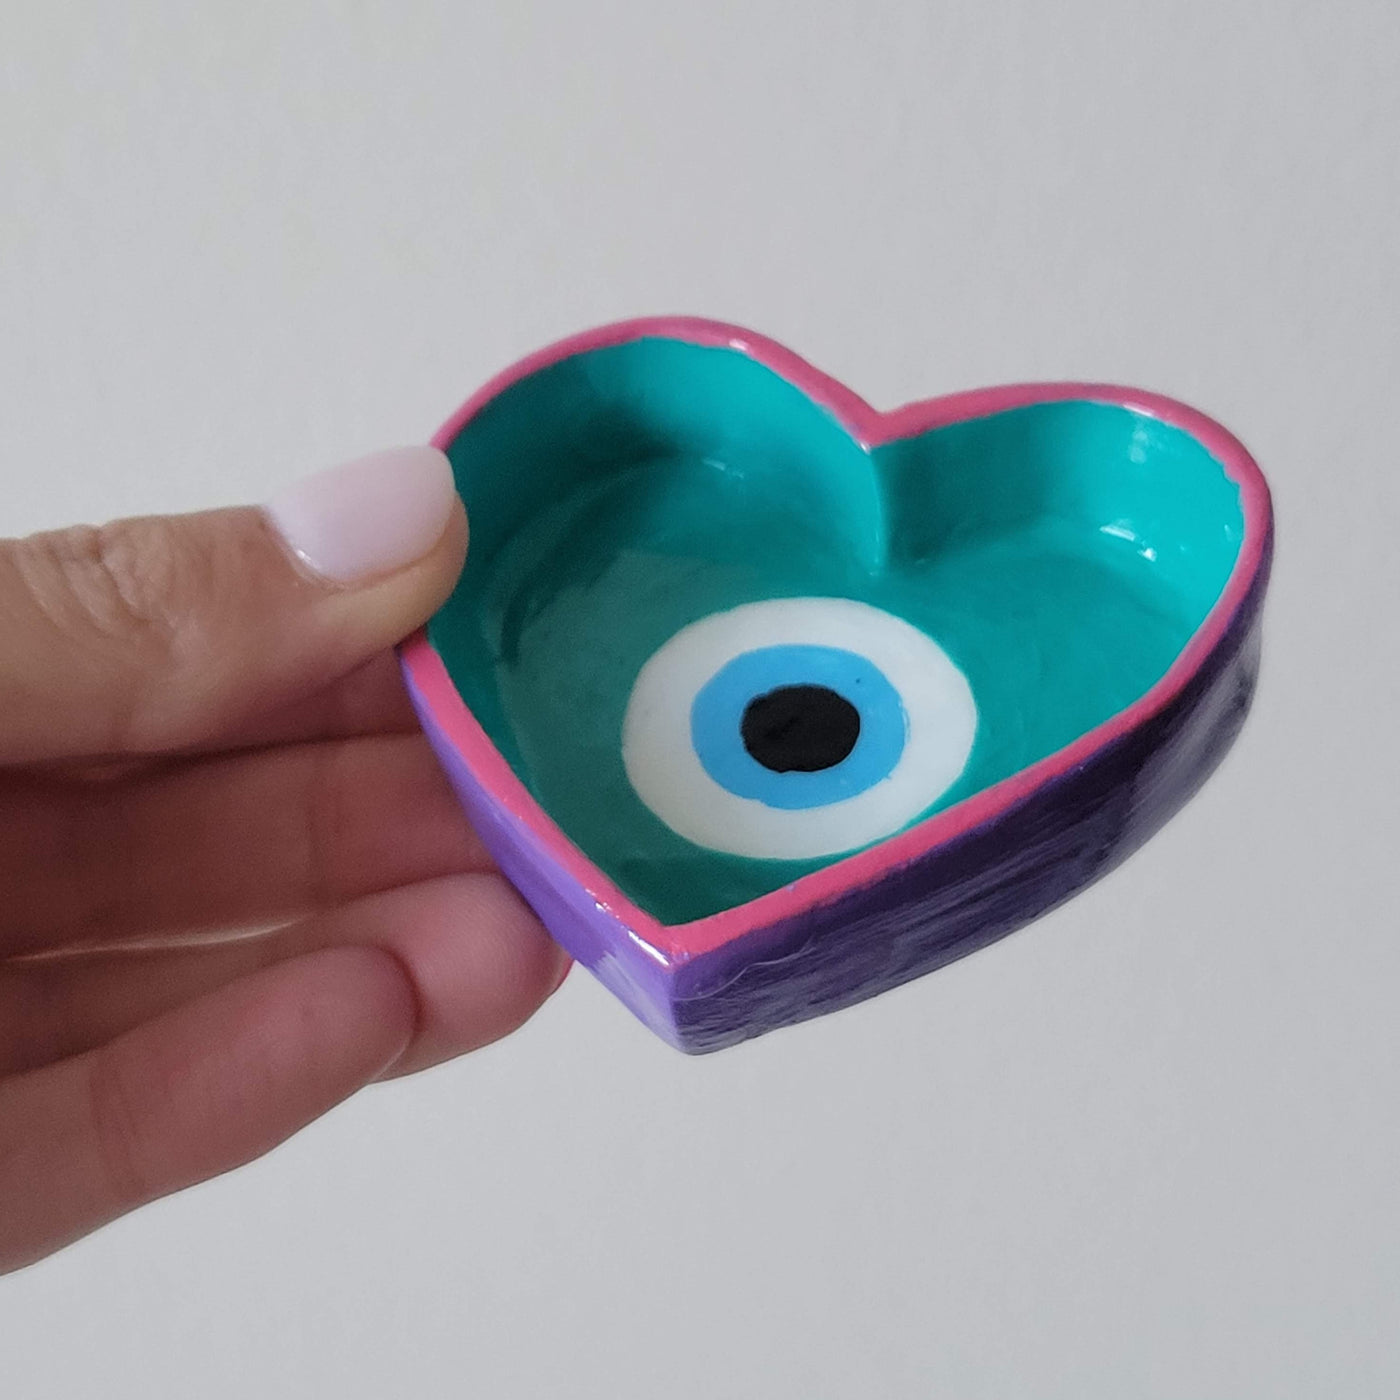 Evil eye painted in a heart shaped ring dish with pink, teal, blue, black and white, held in a hand to show the sides that are painted purple